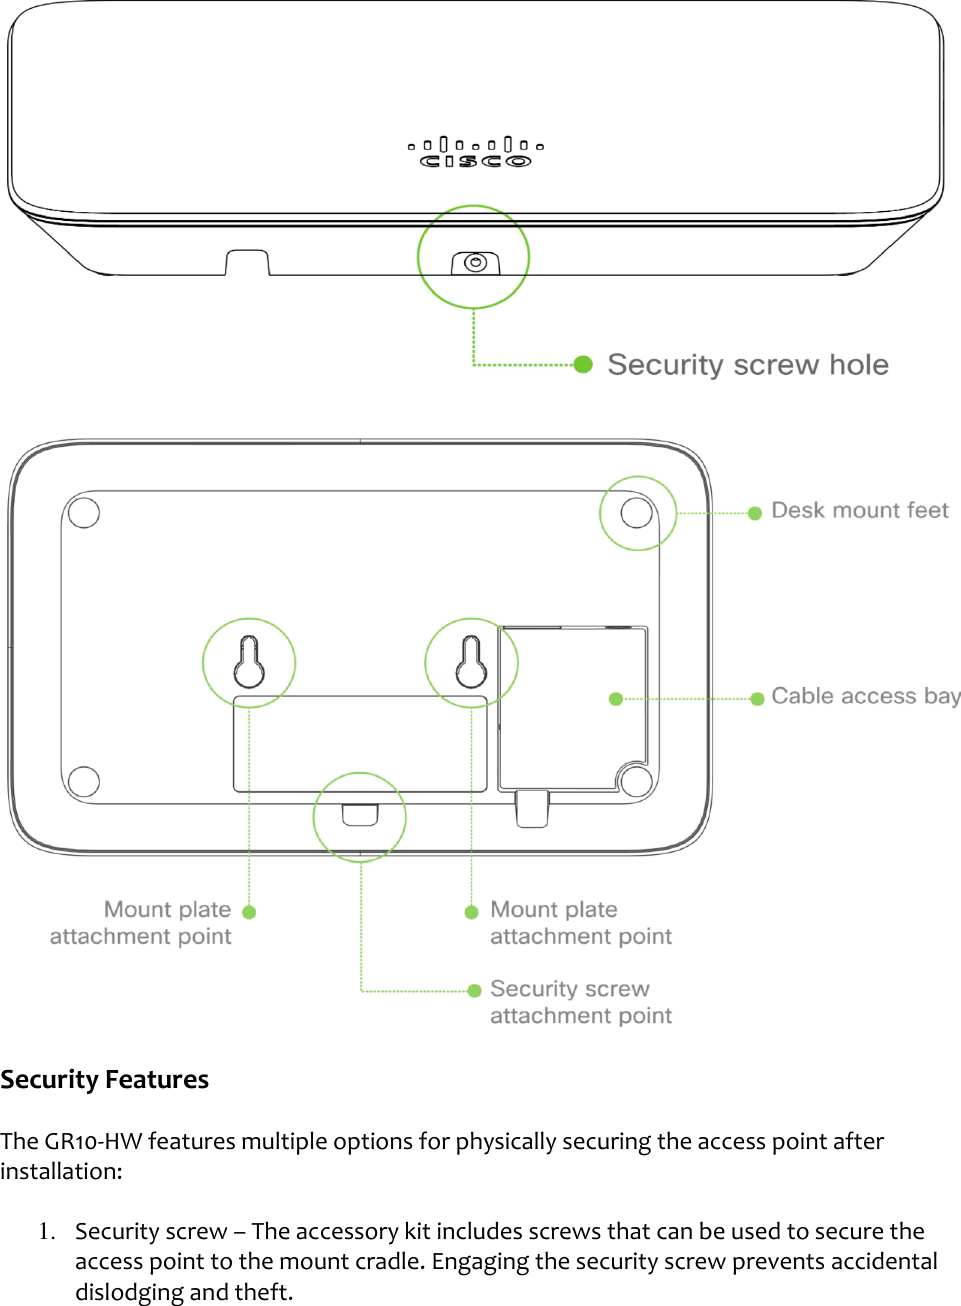   Security Features The GR10-HW features multiple options for physically securing the access point after installation: 1. Security screw – The accessory kit includes screws that can be used to secure the access point to the mount cradle. Engaging the security screw prevents accidental dislodging and theft. 